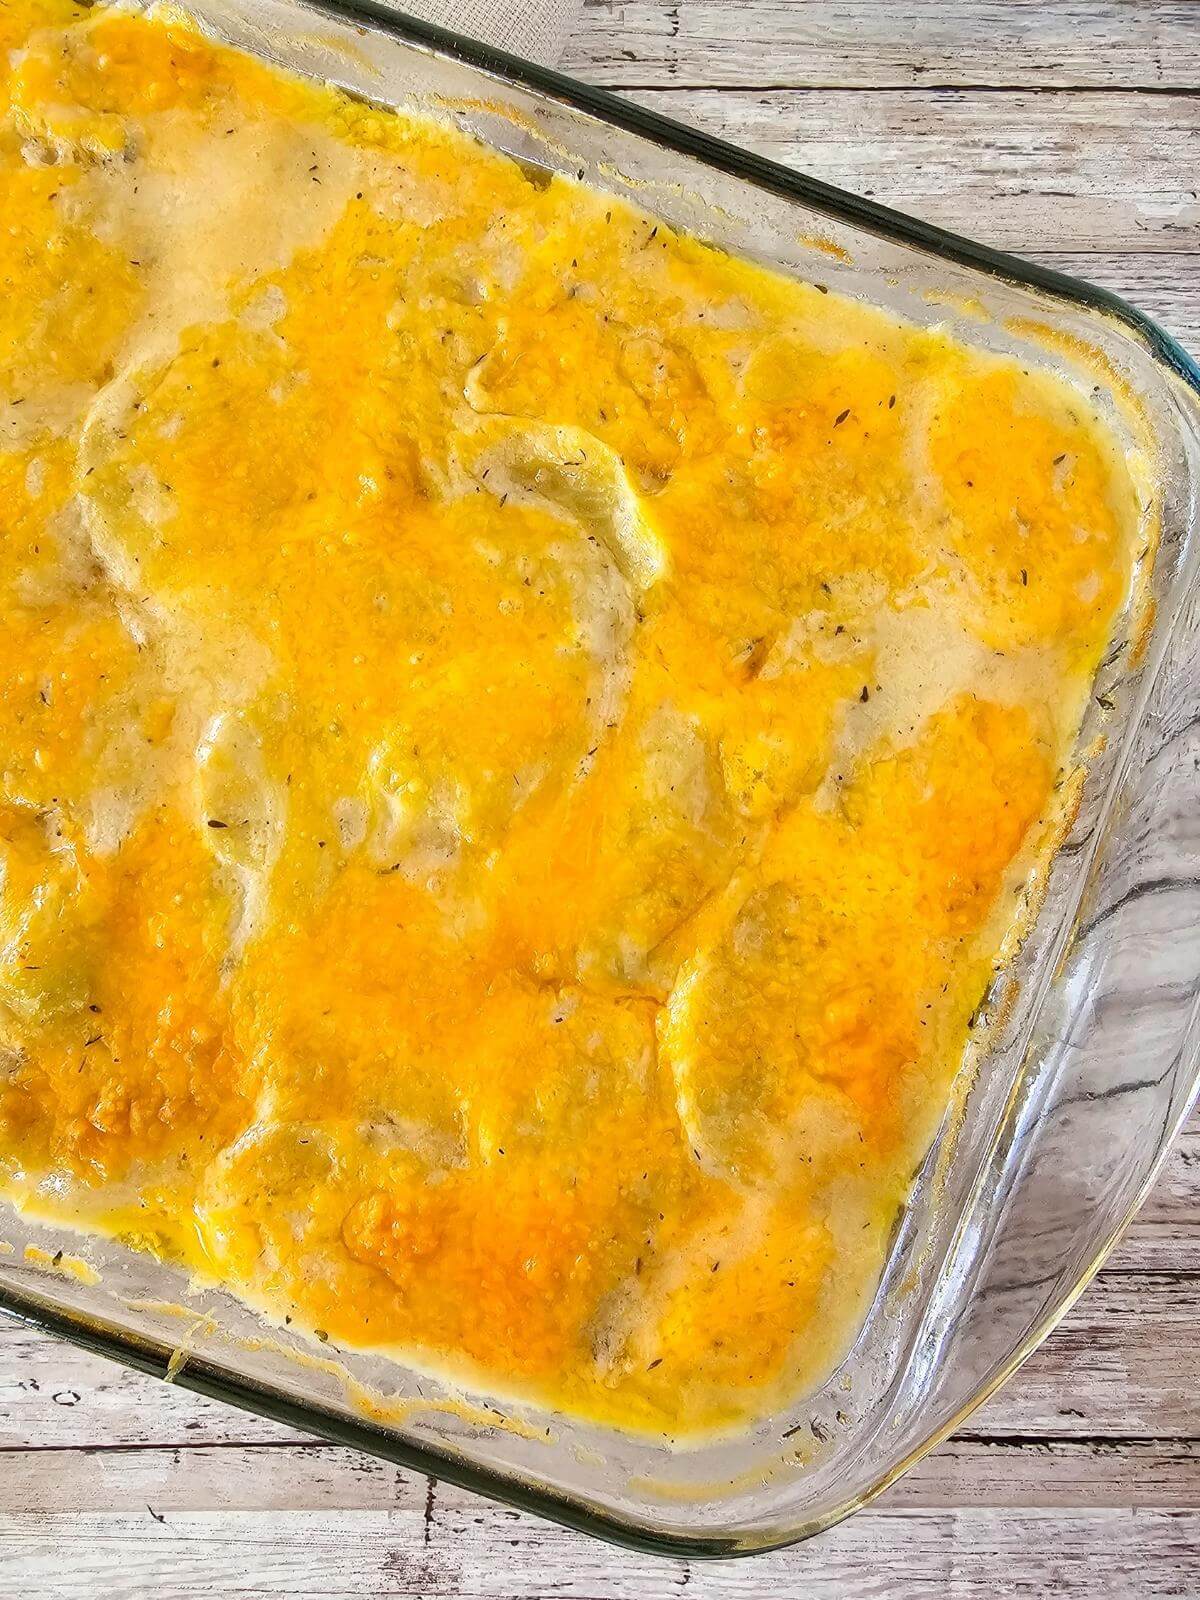 Baked gluten free scalloped potatoes in a casserole dish.